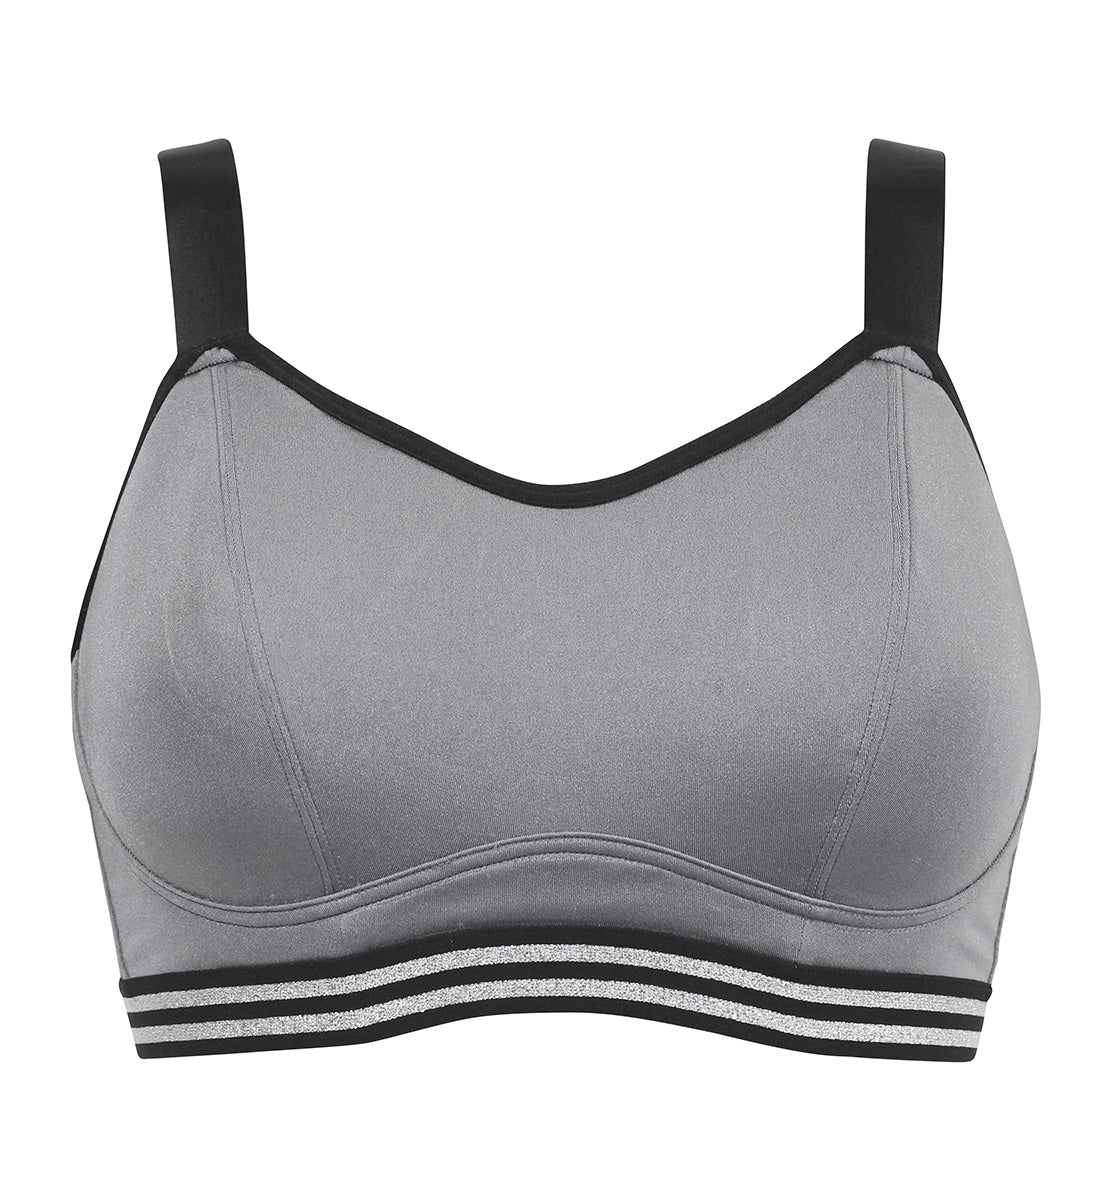 Pour Moi Energy Empower Underwire Light Padded Convertible Sports Bra (97003),34C,Silver/Black - Silver/Black,34C